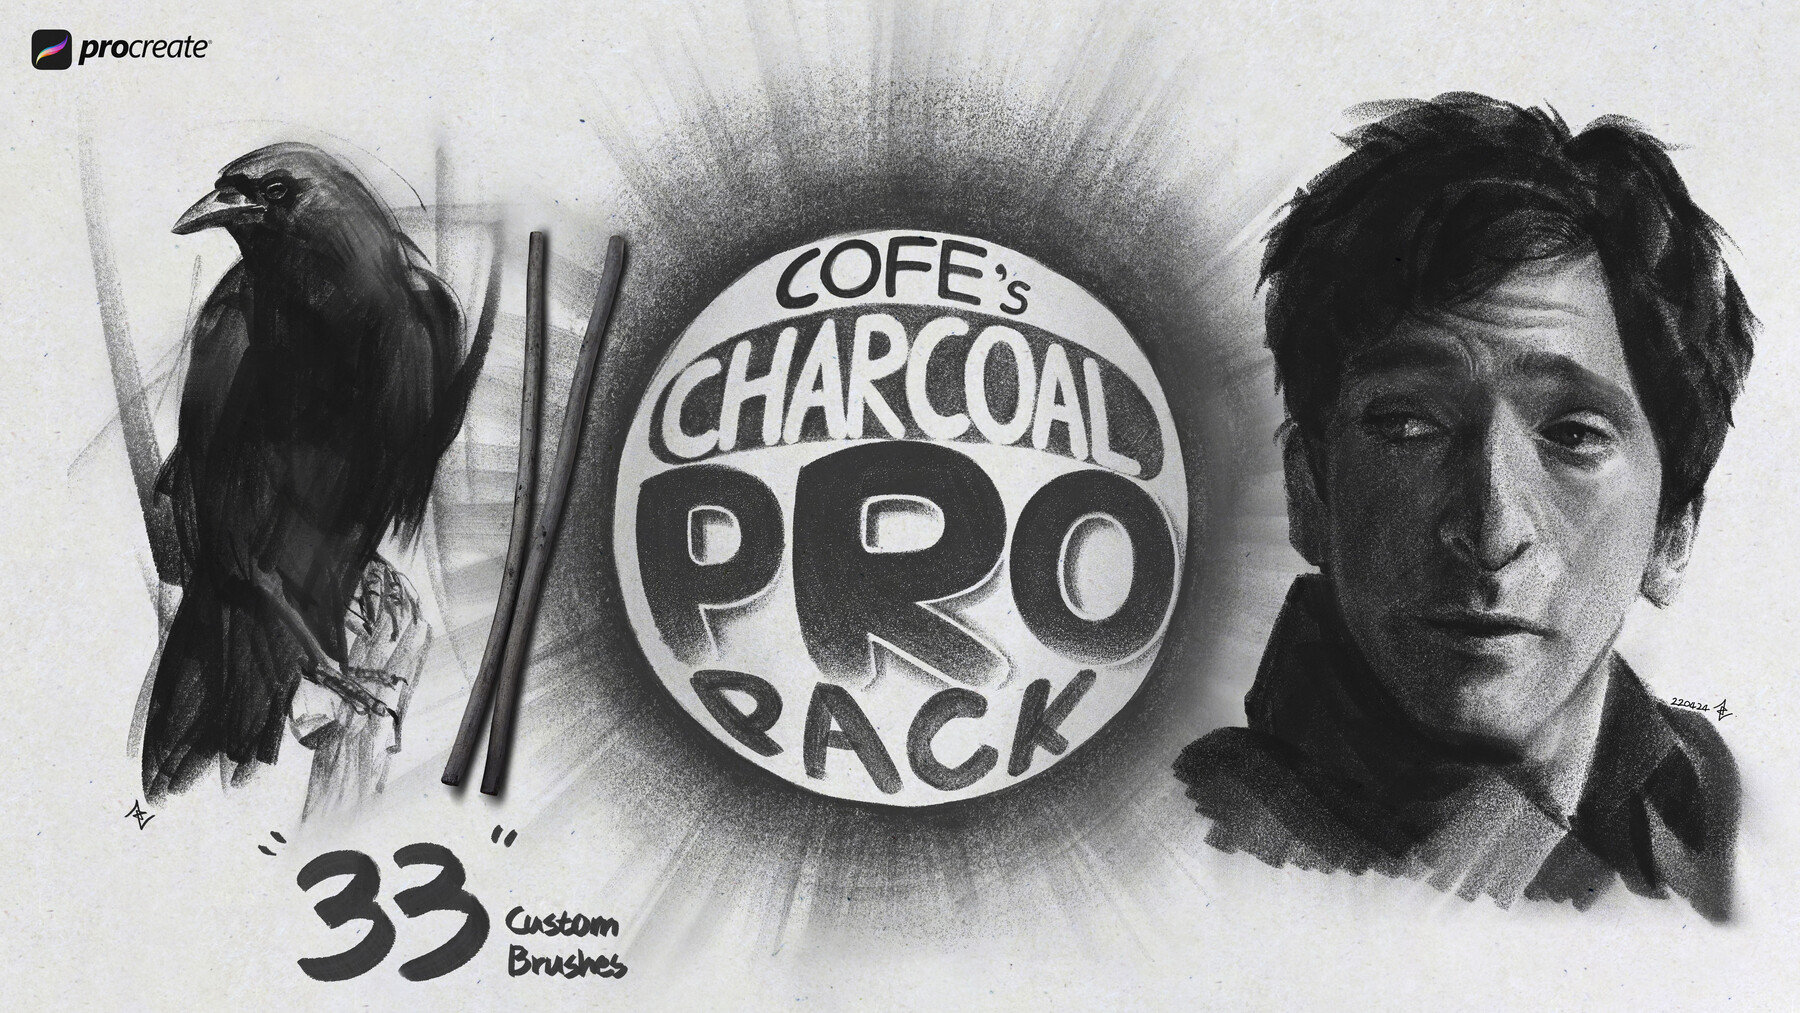 COFE's Charcoal Pro Pack